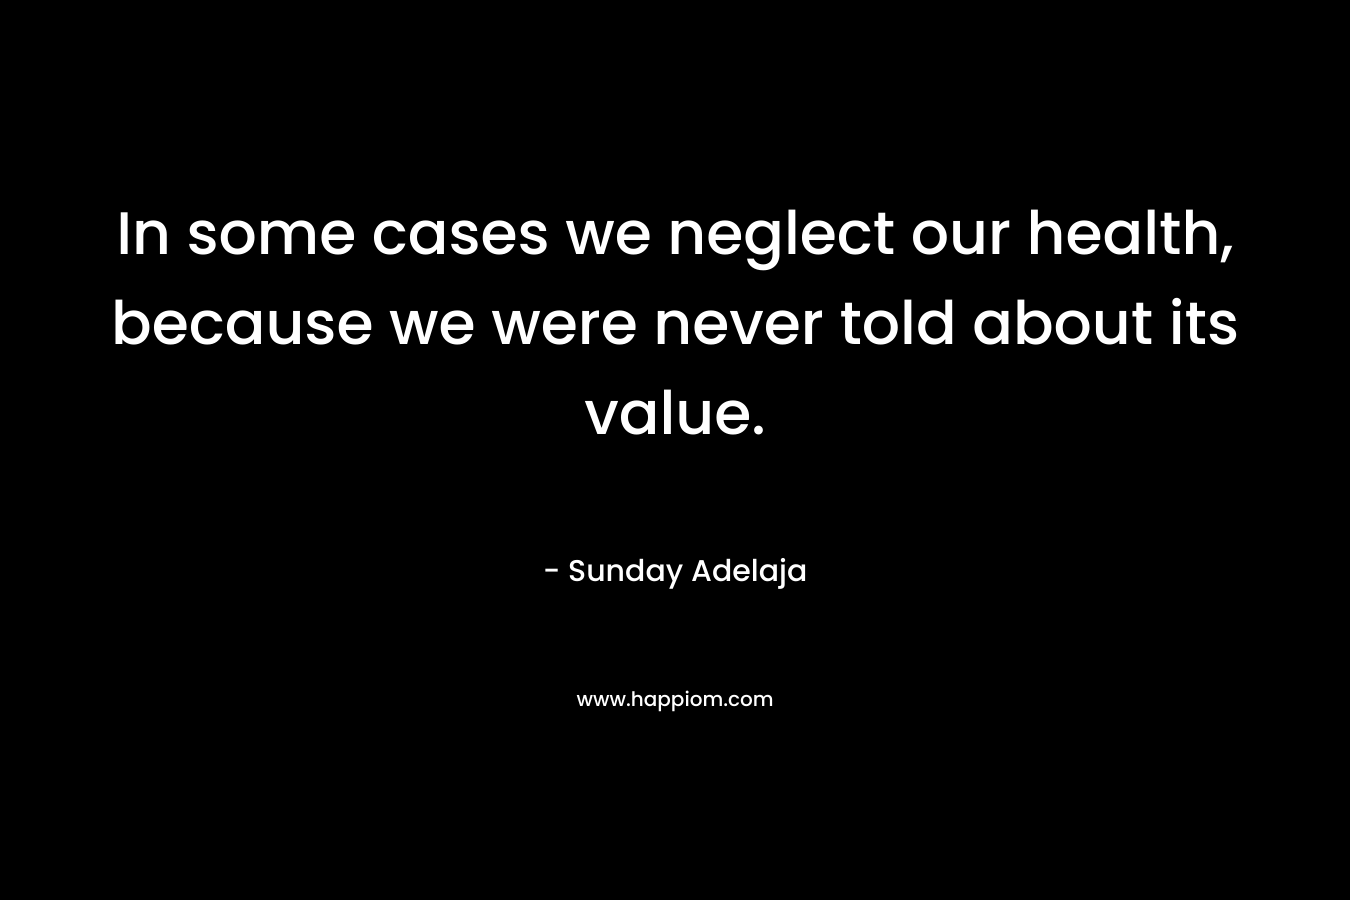 In some cases we neglect our health, because we were never told about its value. – Sunday Adelaja